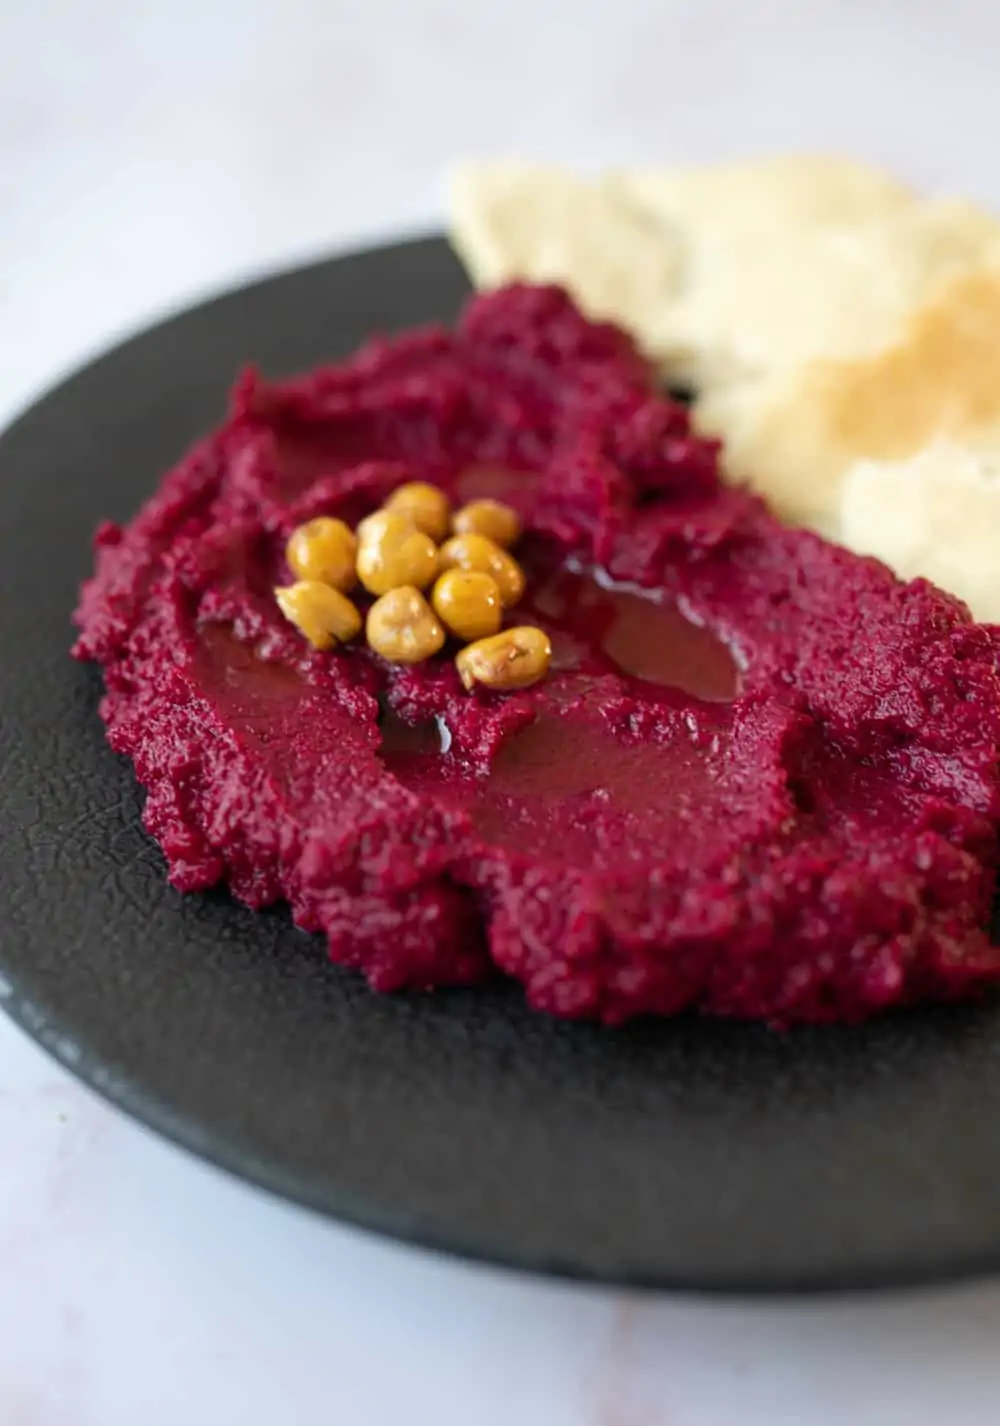 Black plate with a pile of roasted beetroot dip on one half and some flatbread on the other half.